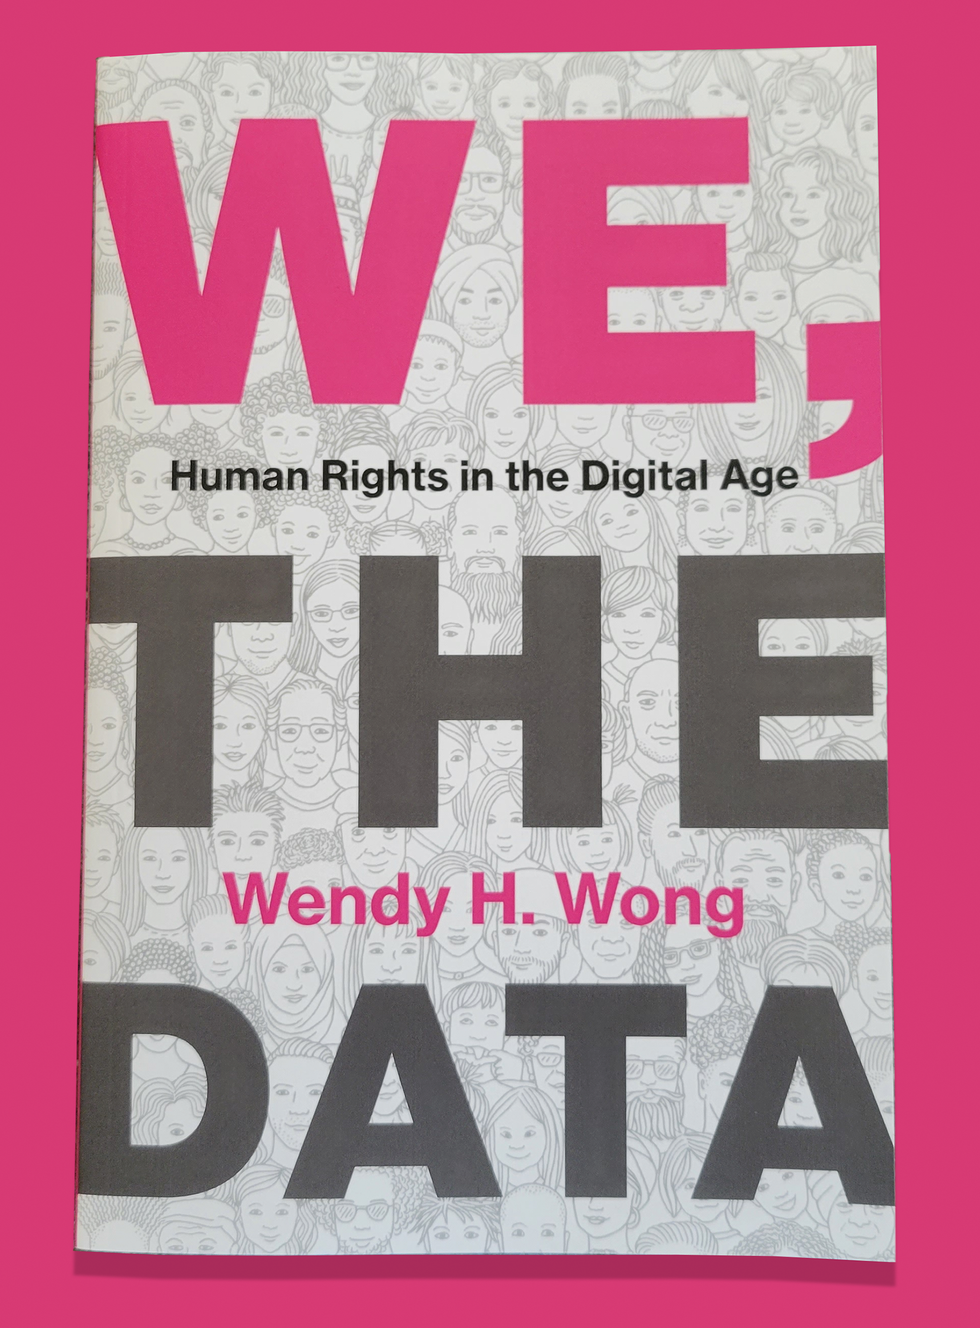 An image of the cover of "We, The Data."